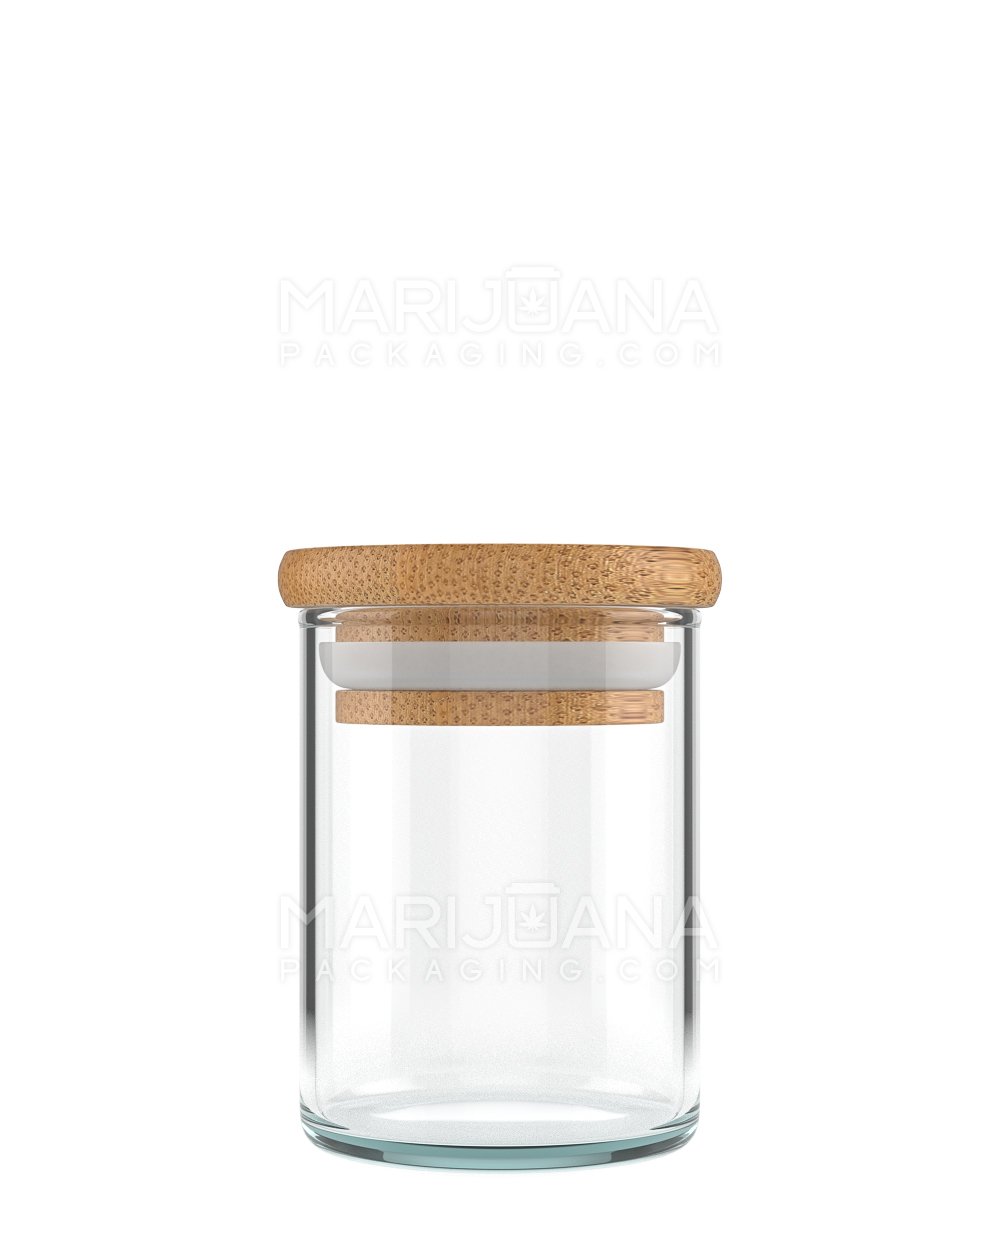 100 G Clear Glass Straight Sided Jars 50-400 Neck Finish